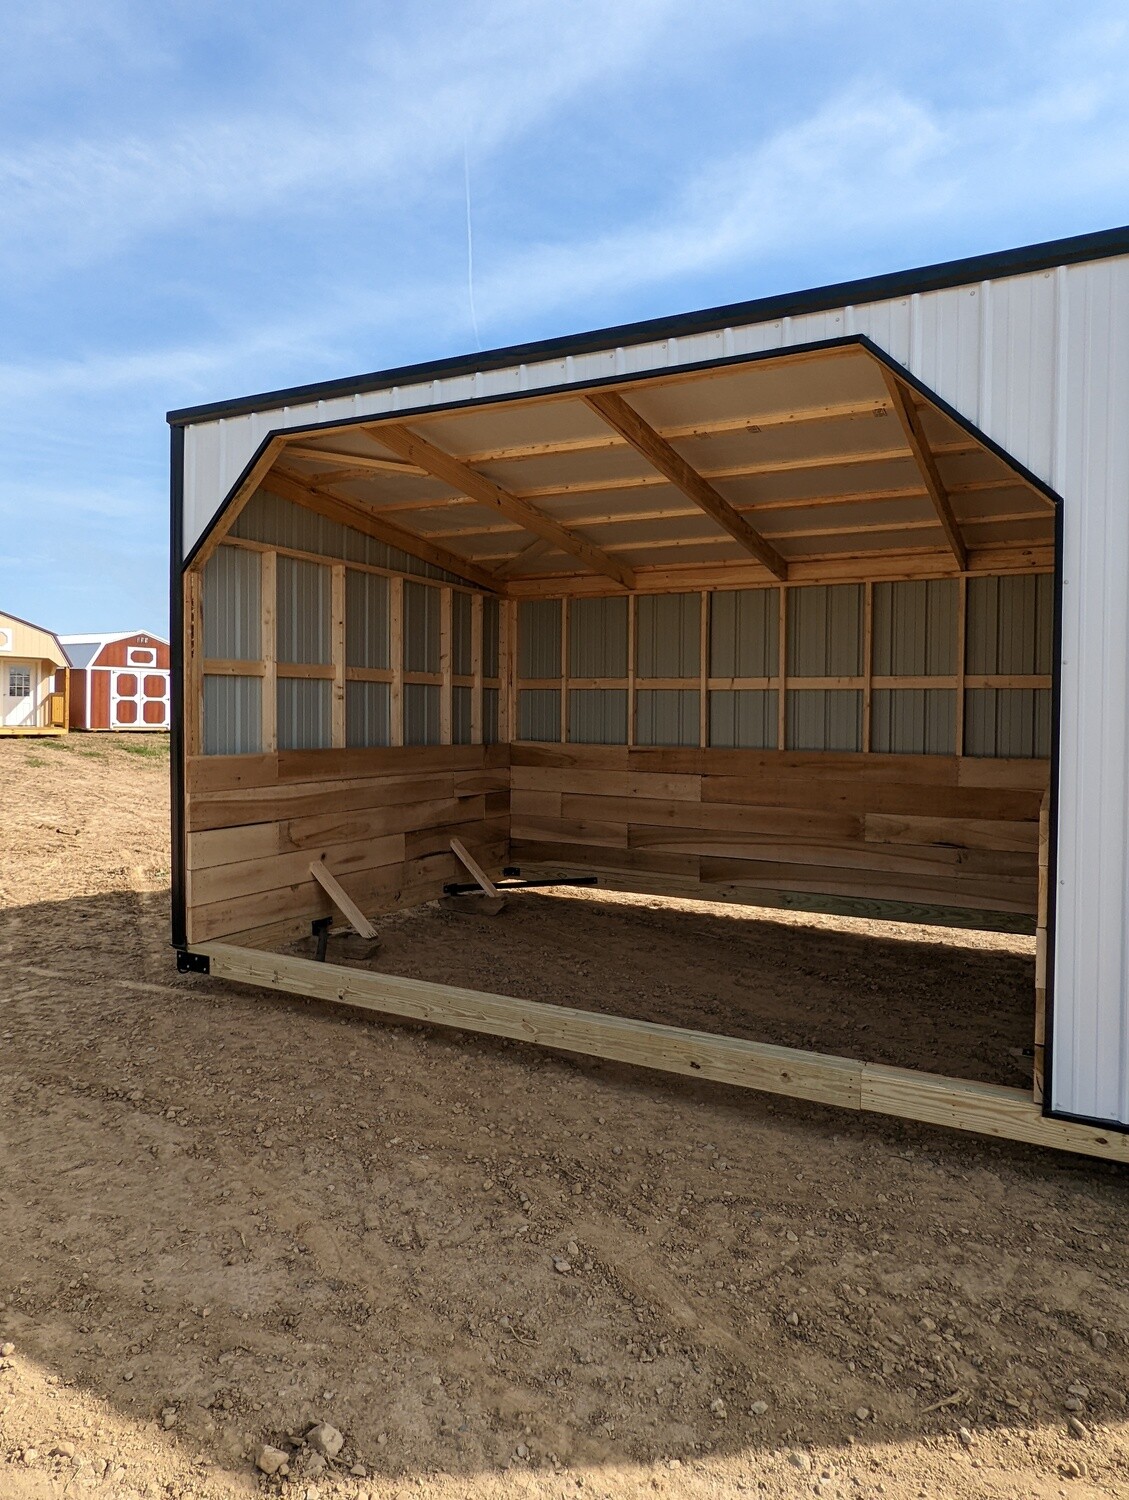 10' x 20' Horse Run-in Structures